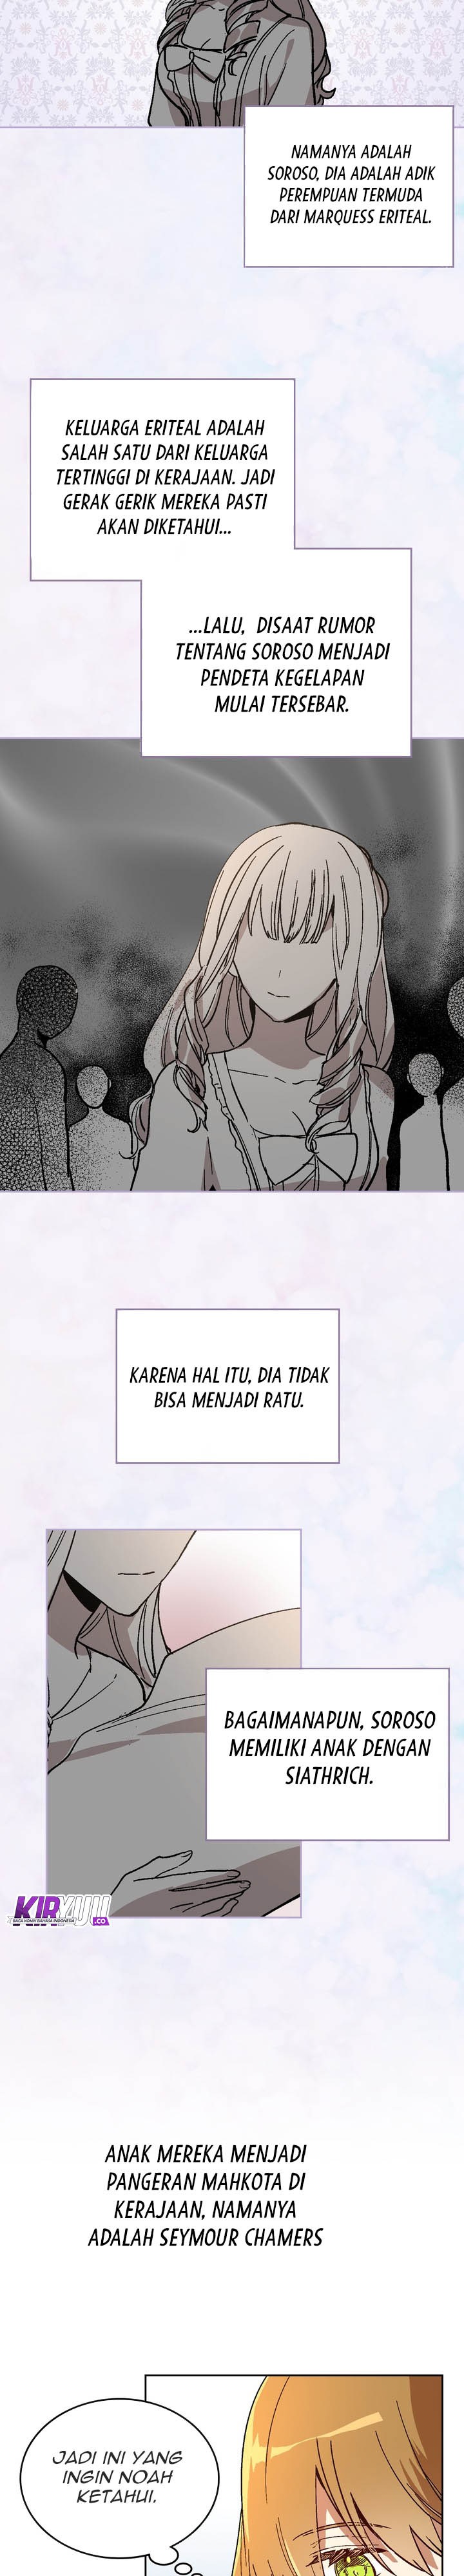 The Reason Why Raeliana Ended up at the Duke’s Mansion Chapter 54